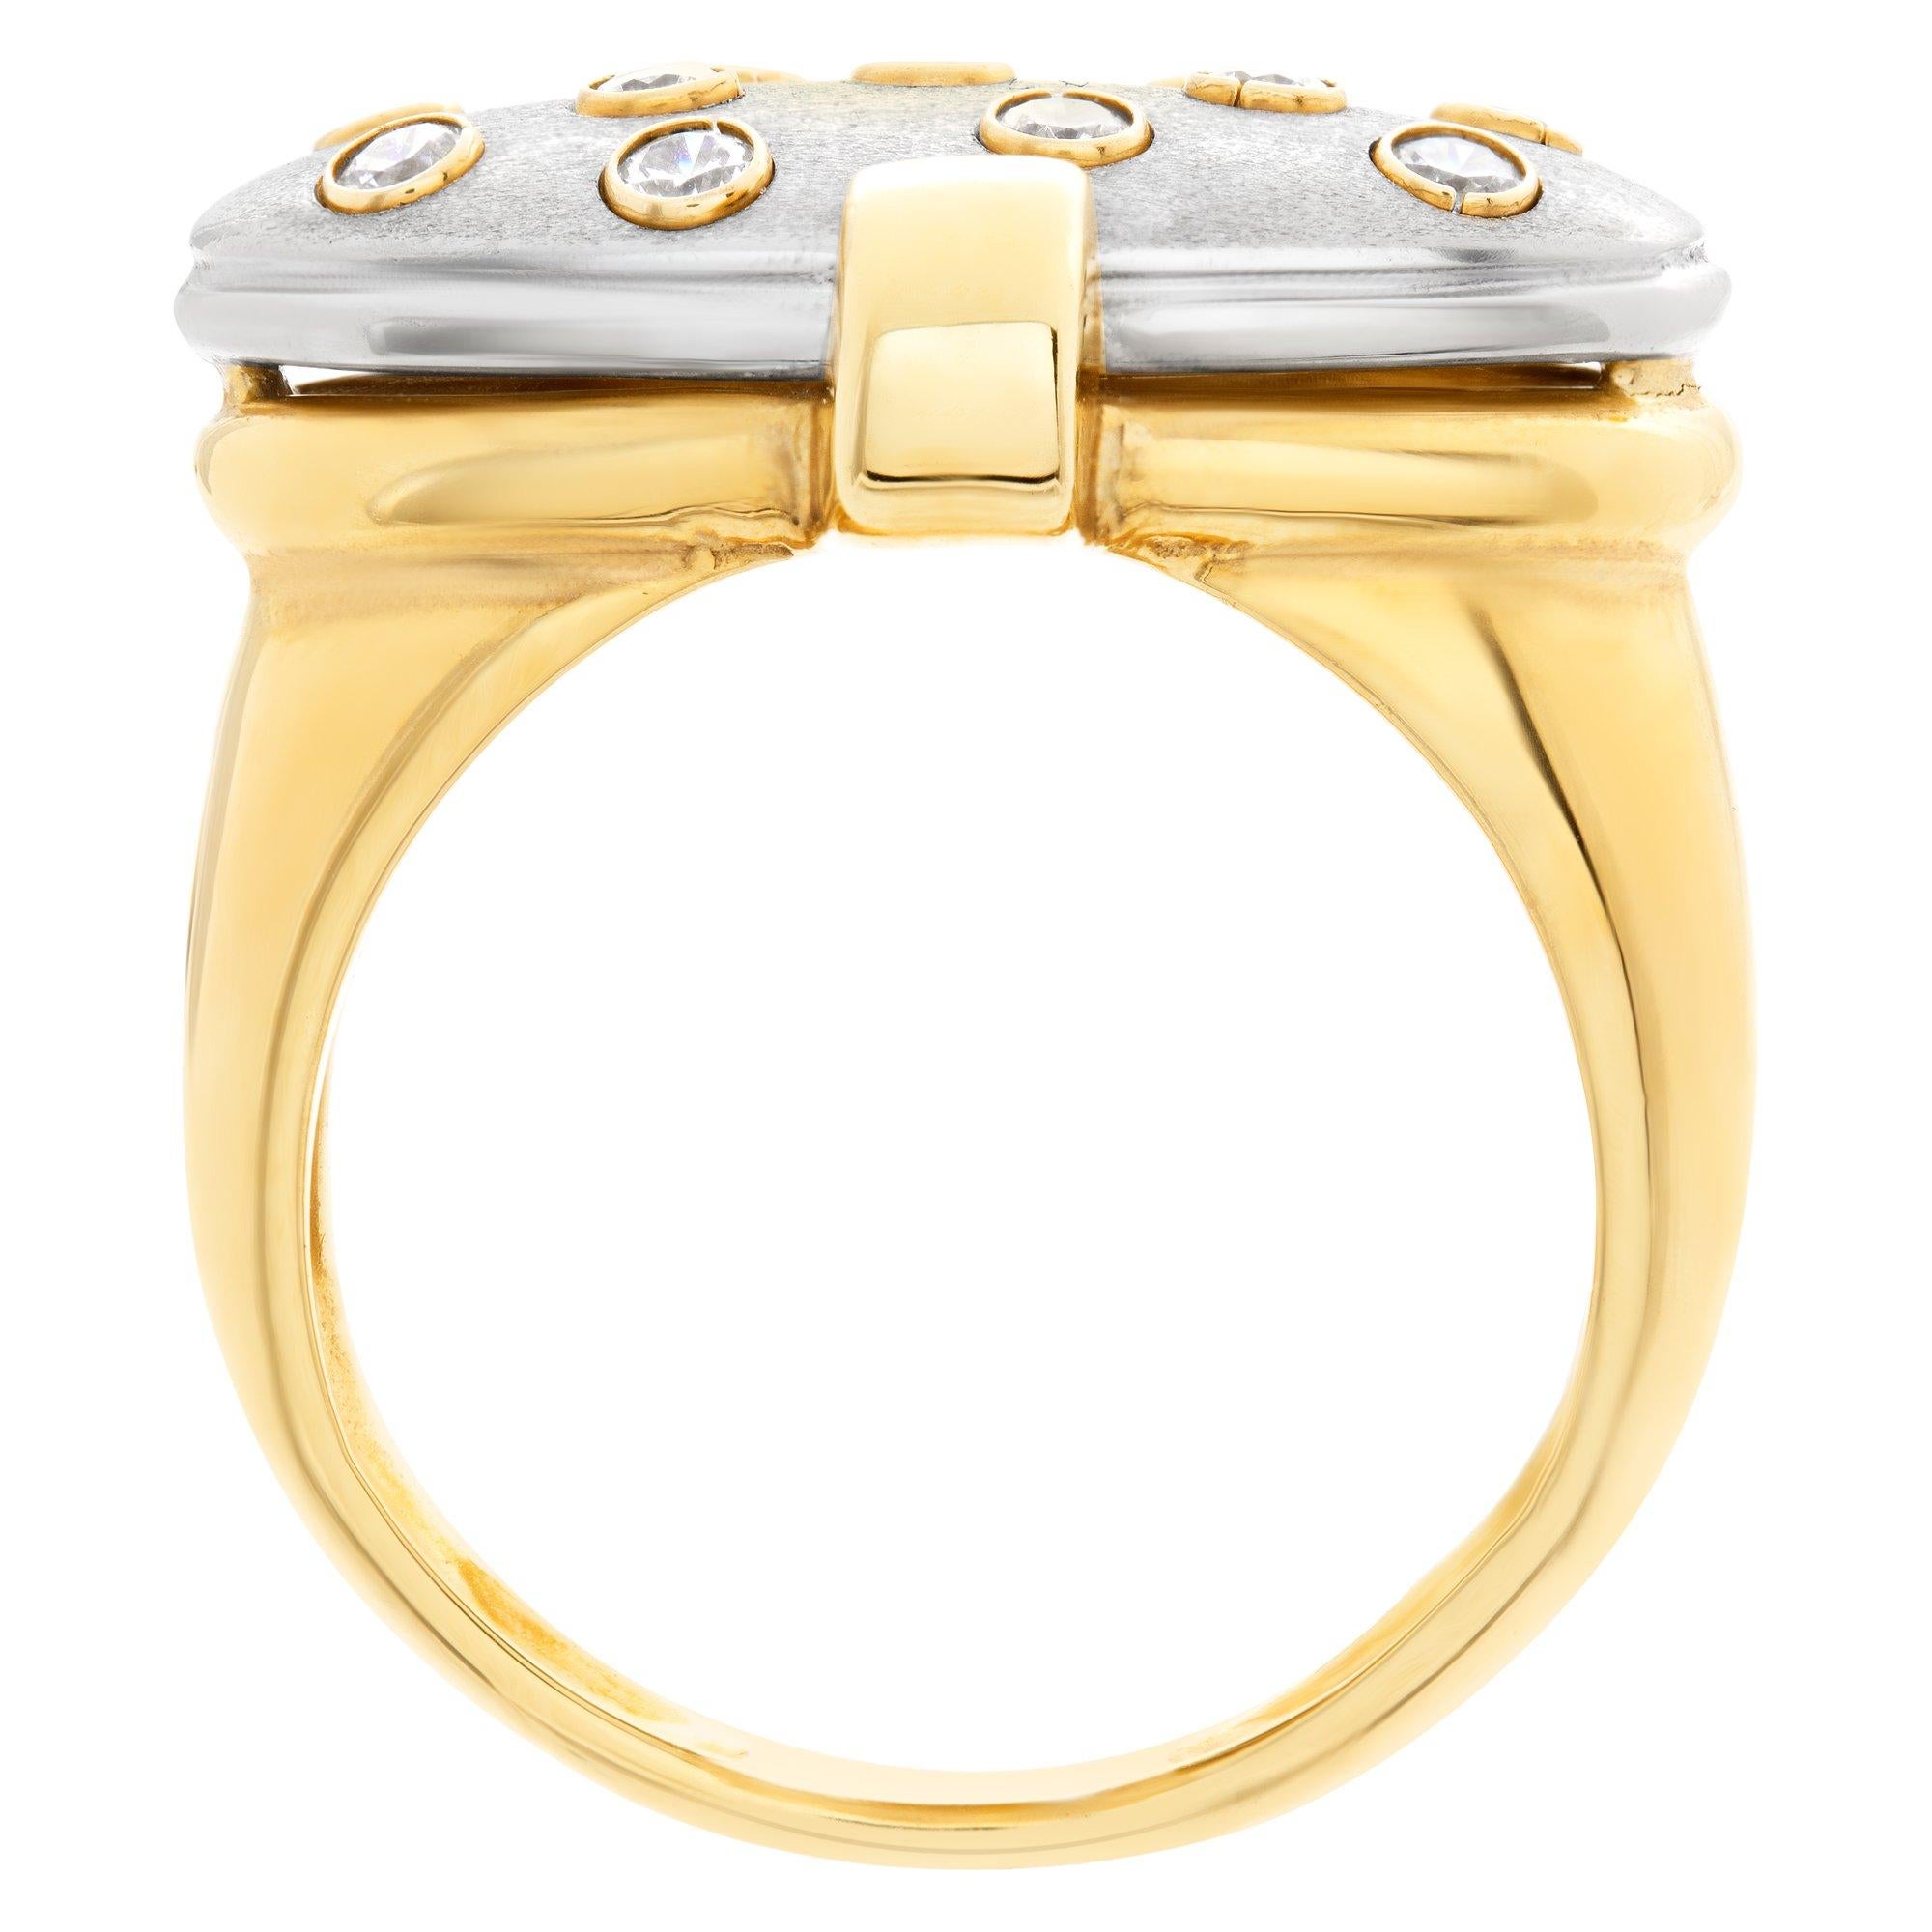 Women's Modern Design 18k White & Yellow Gold Ring w App 0.50 Cts in Diamond Accents For Sale